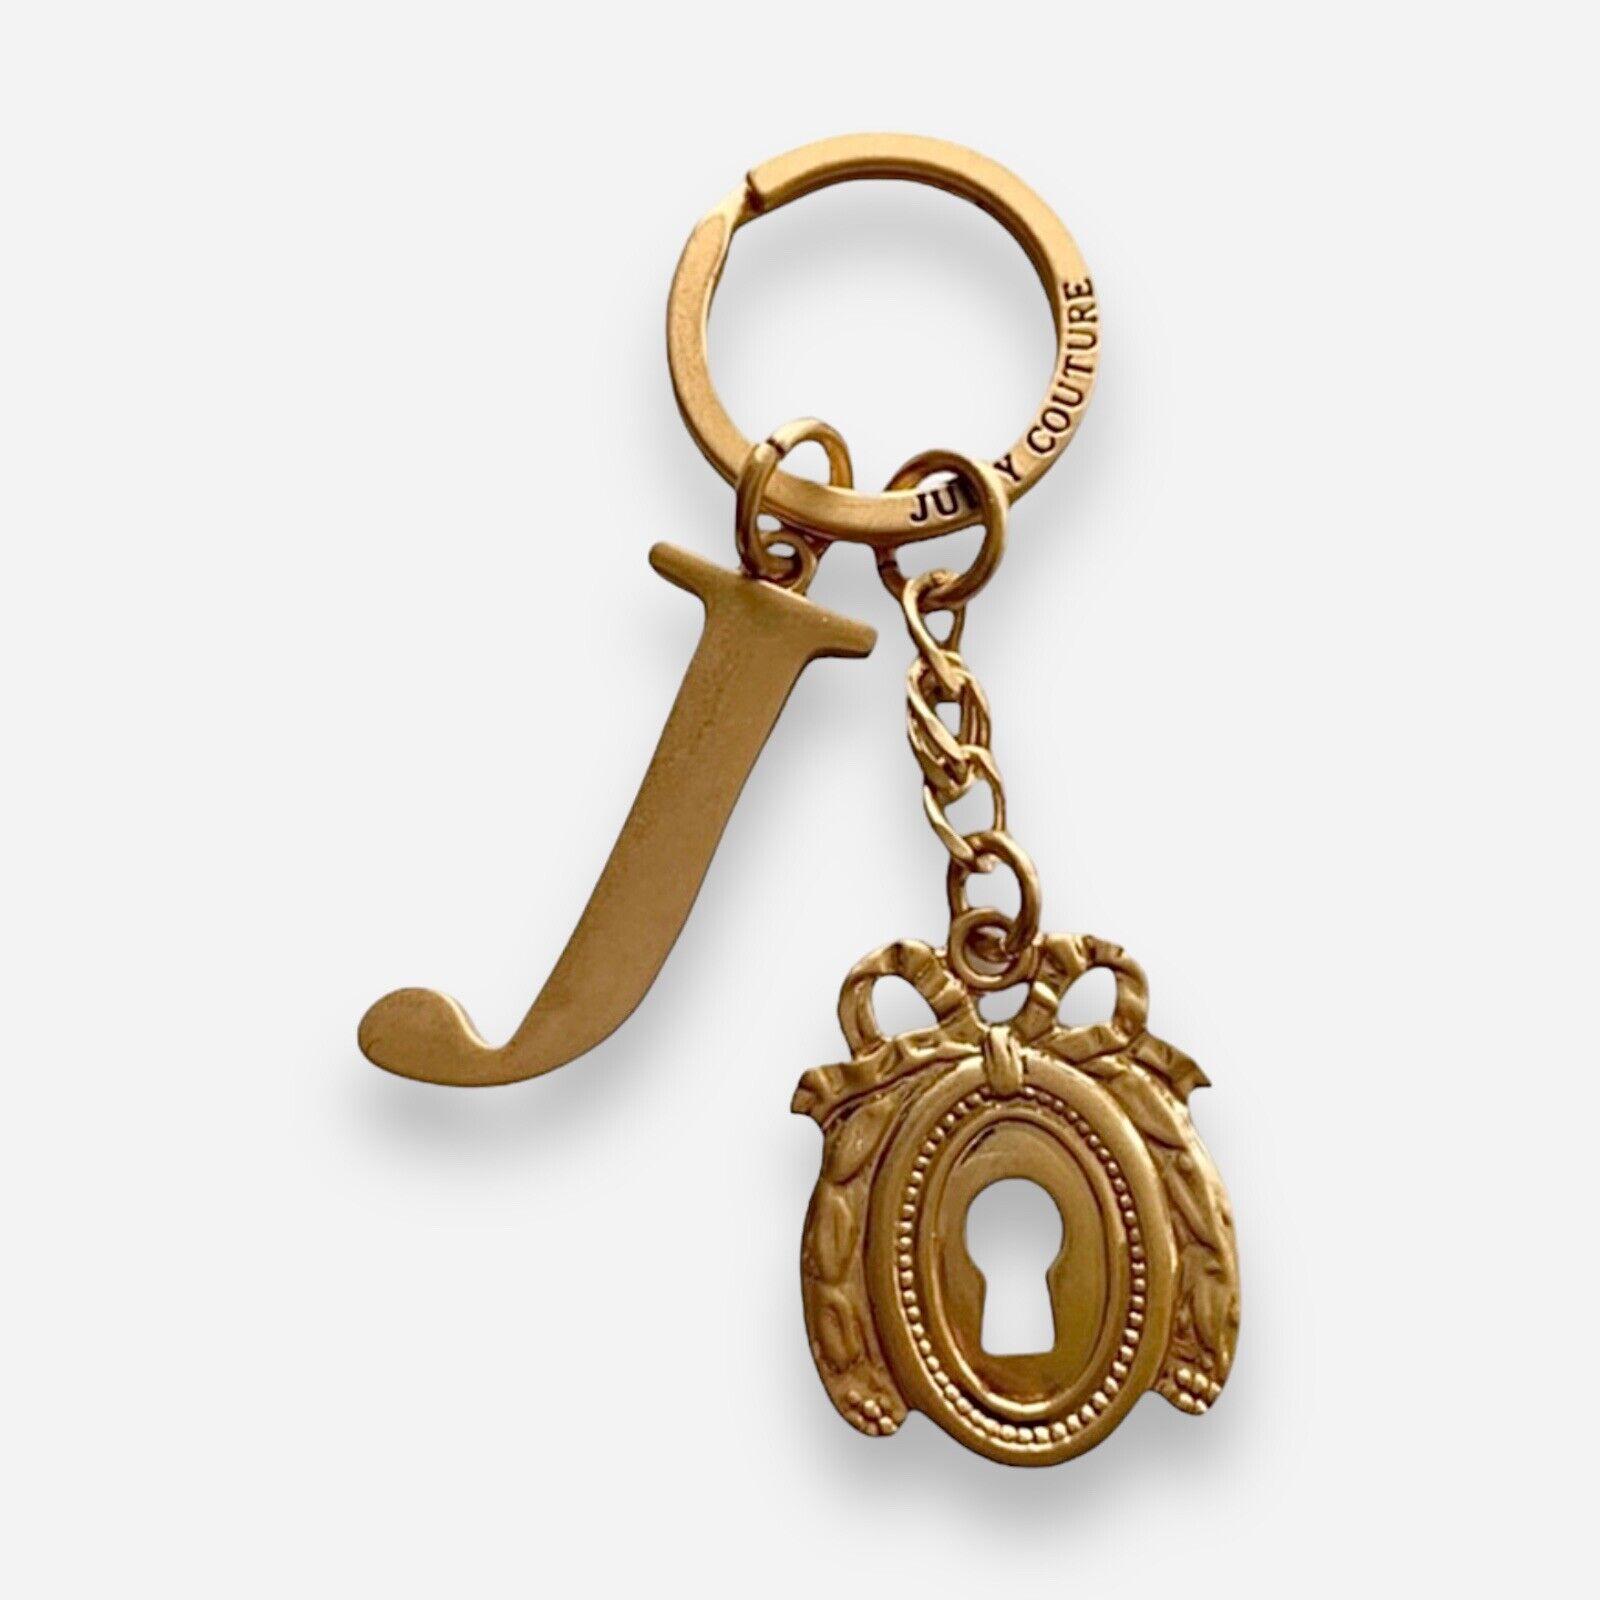 Juicy Couture Keychain Keyhole Gold Tone Brand New